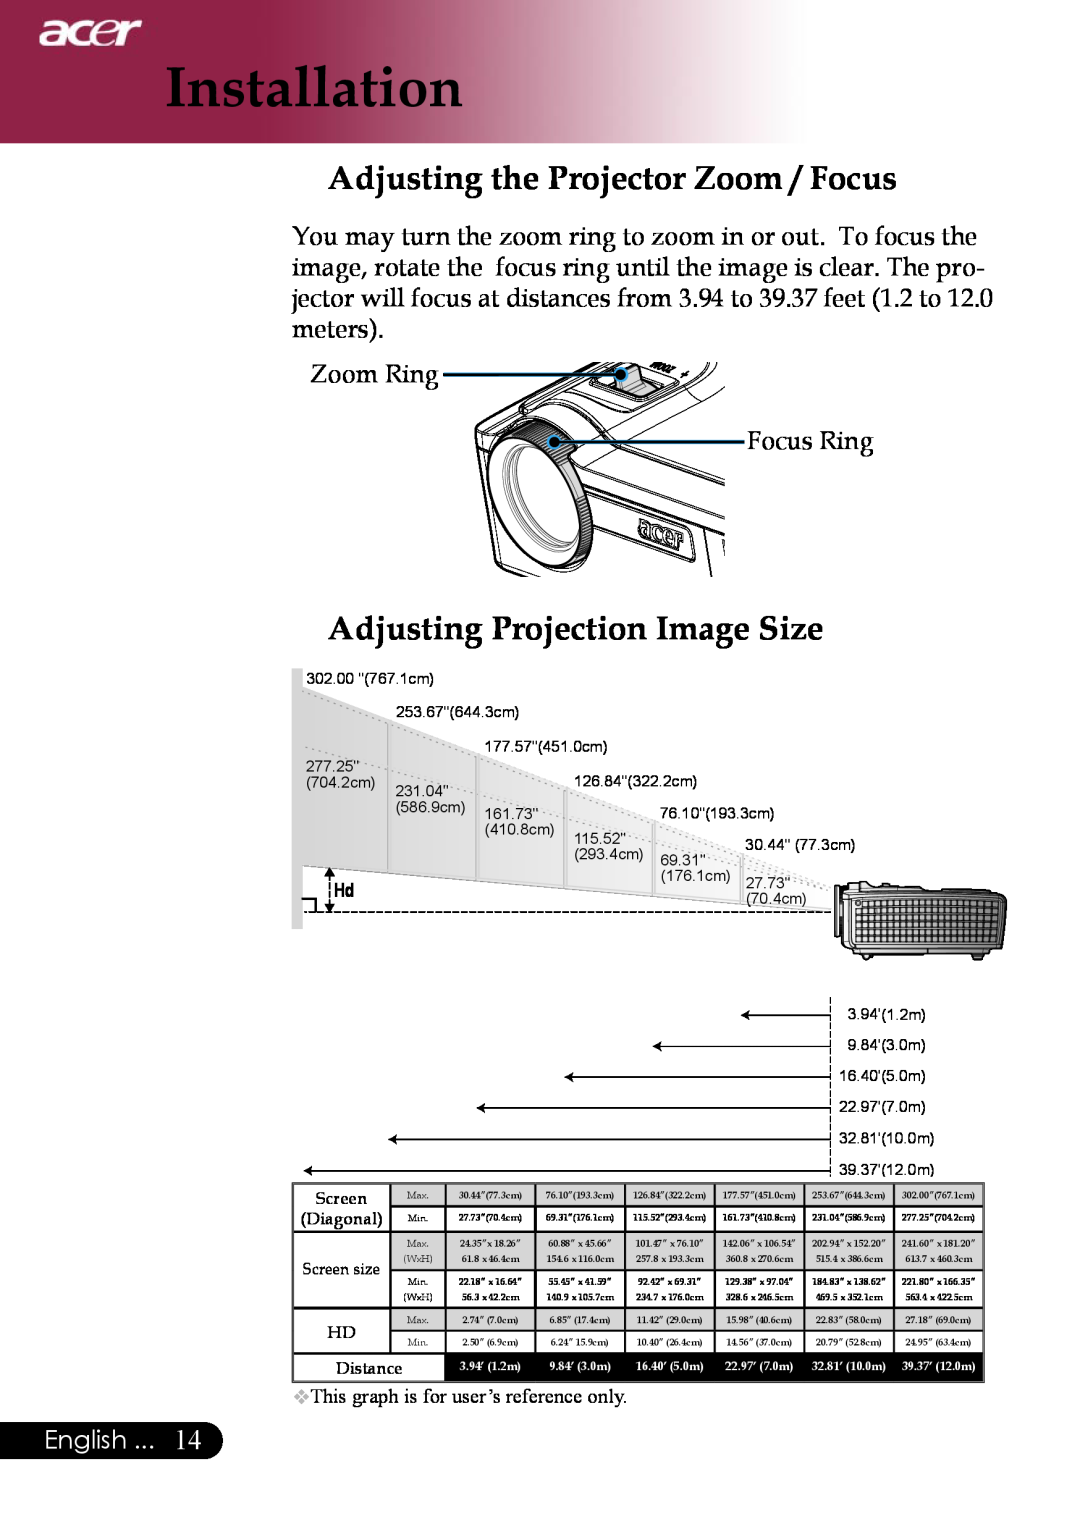 Acer PD323, PD311 Adjusting the Projector Zoom / Focus, Adjusting Projection Image Size, Installation, English, Diagonal 